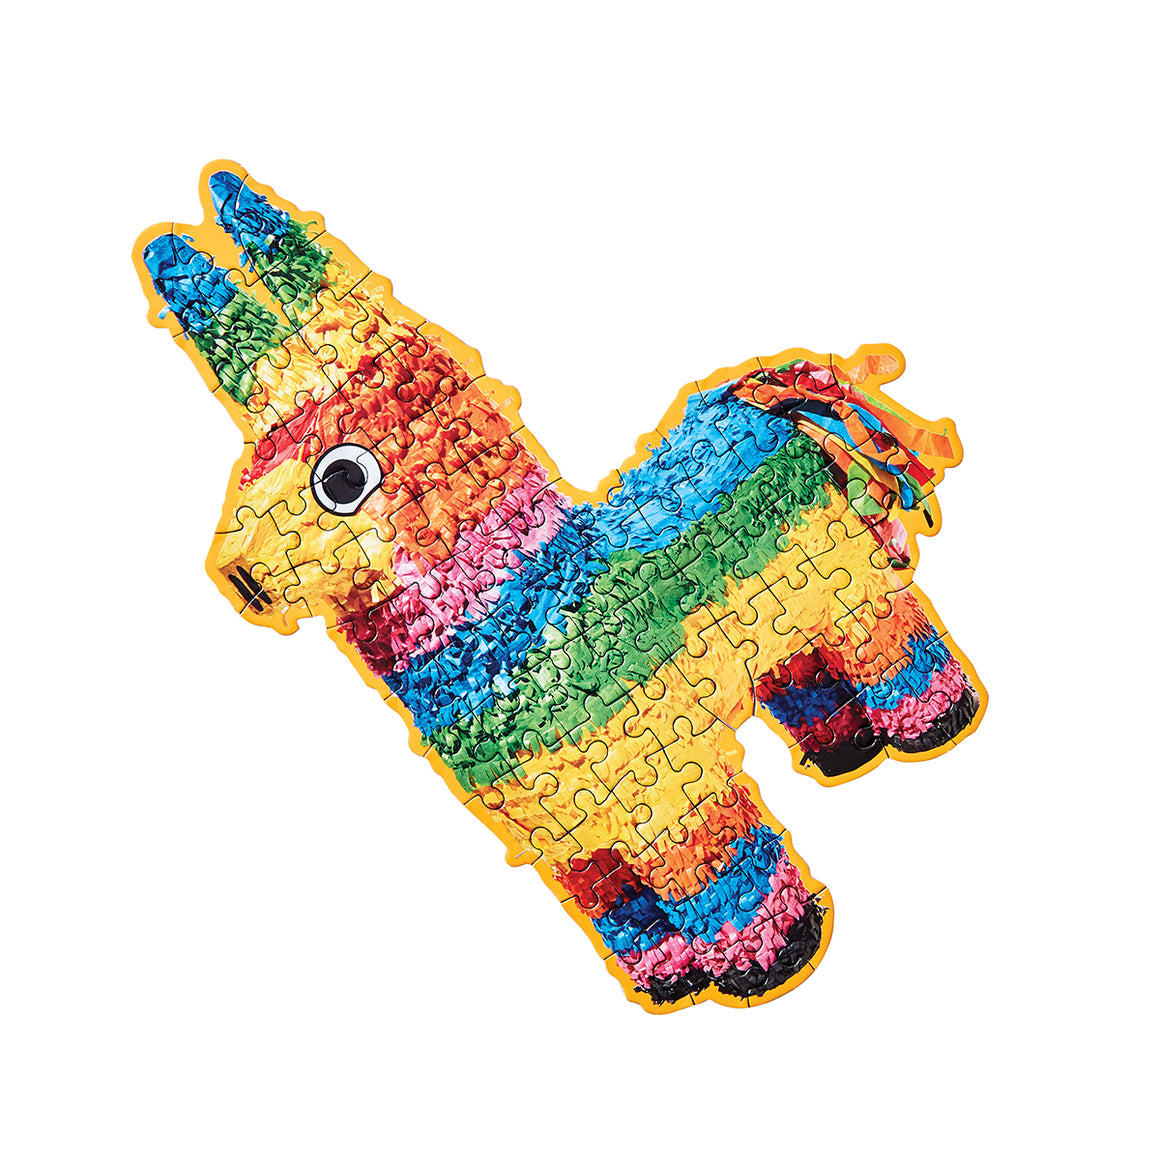 A completed puzzle is in the shape of the photographed colourful donkey pinata with an orange border. 